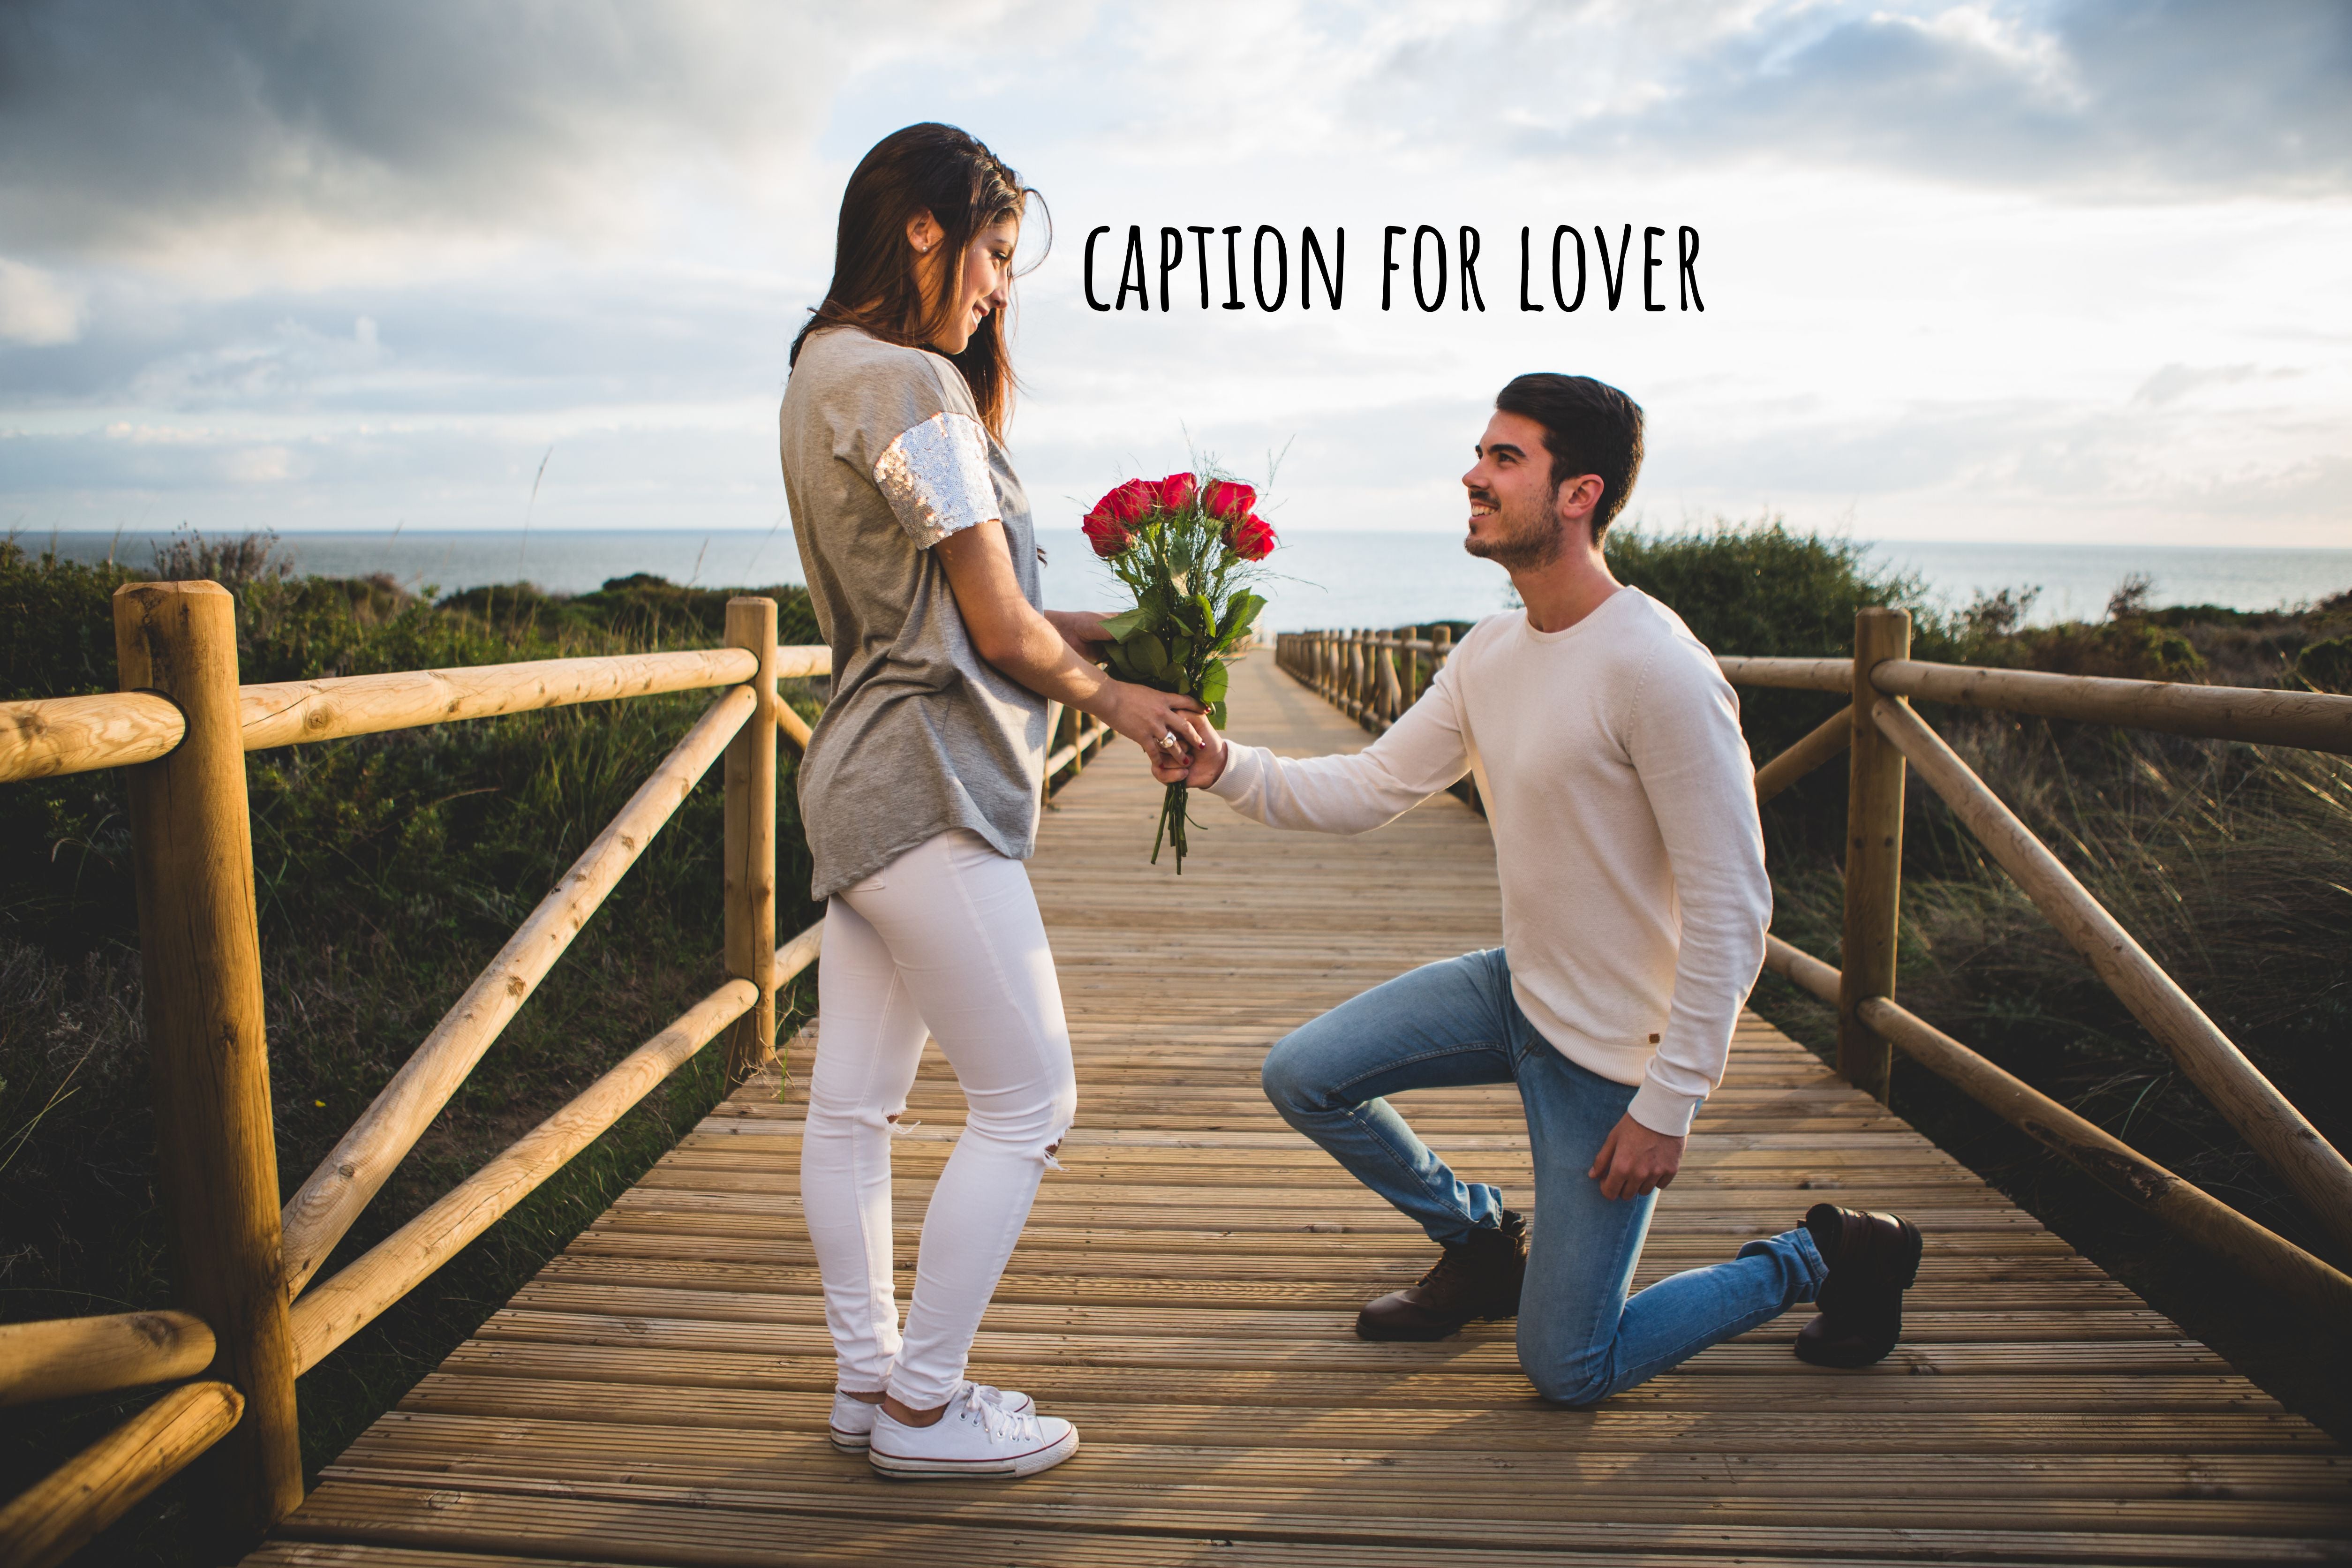 Heartwarming Captions for Lovers to Share on Social Media